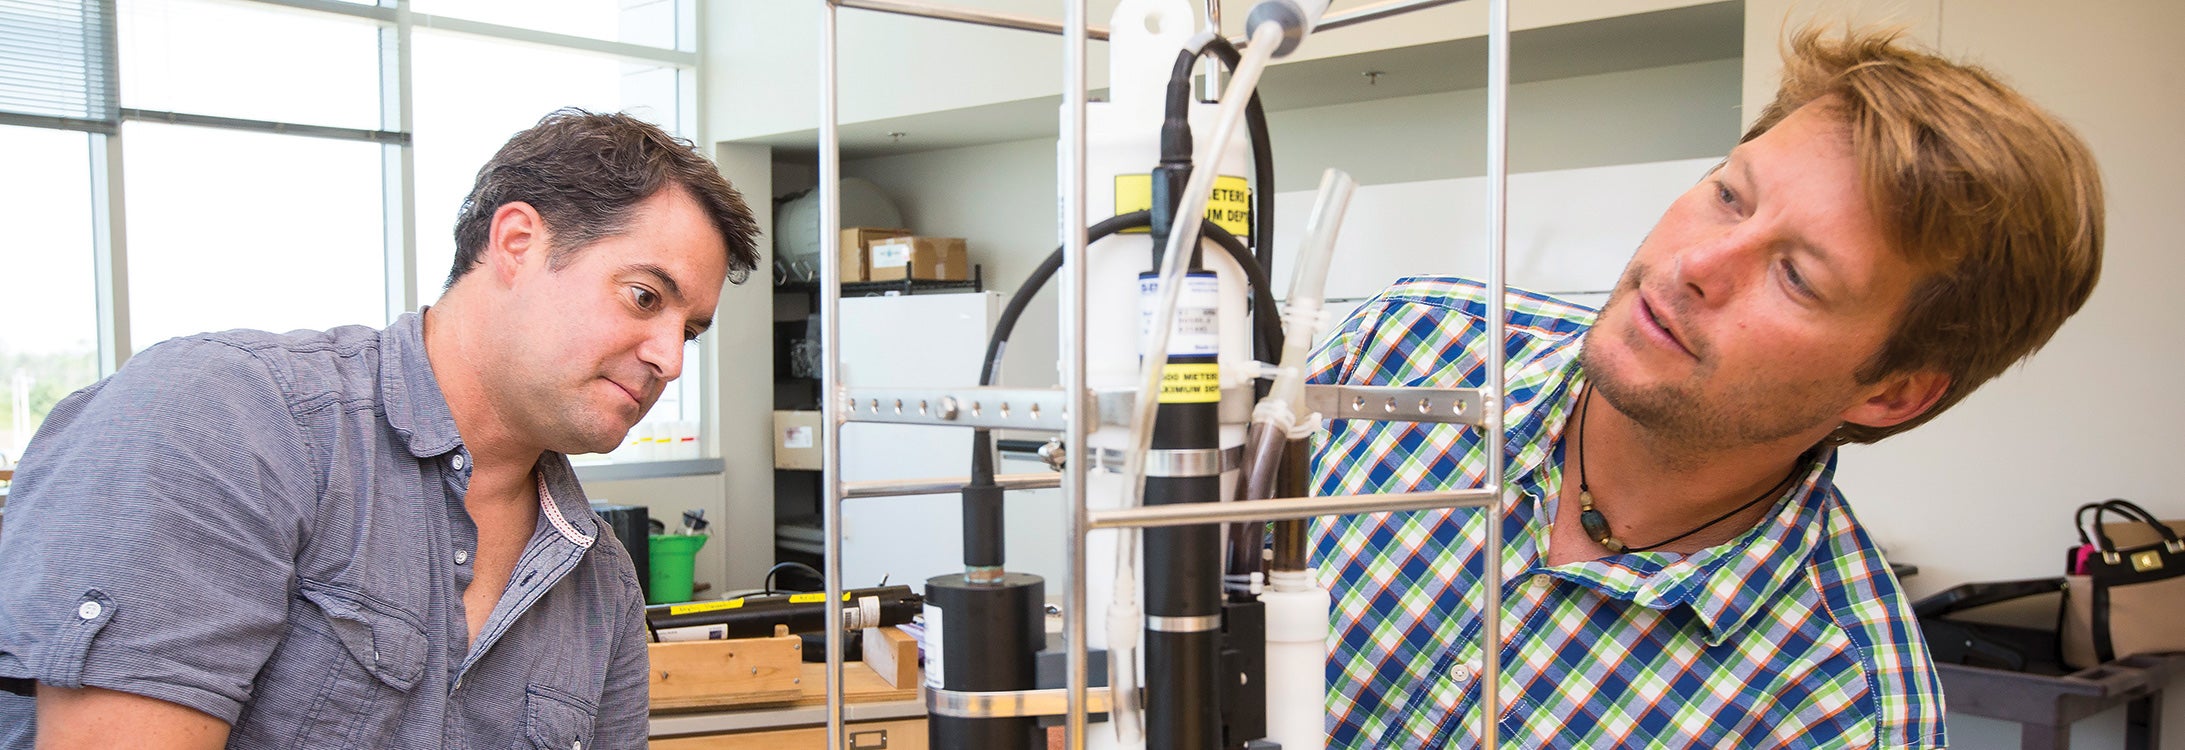 ECU geology professors J.P. Walsh, left, and Reide Corbett work with an instrument in a lab at the University of North Carolina Coastal Studies Institute.